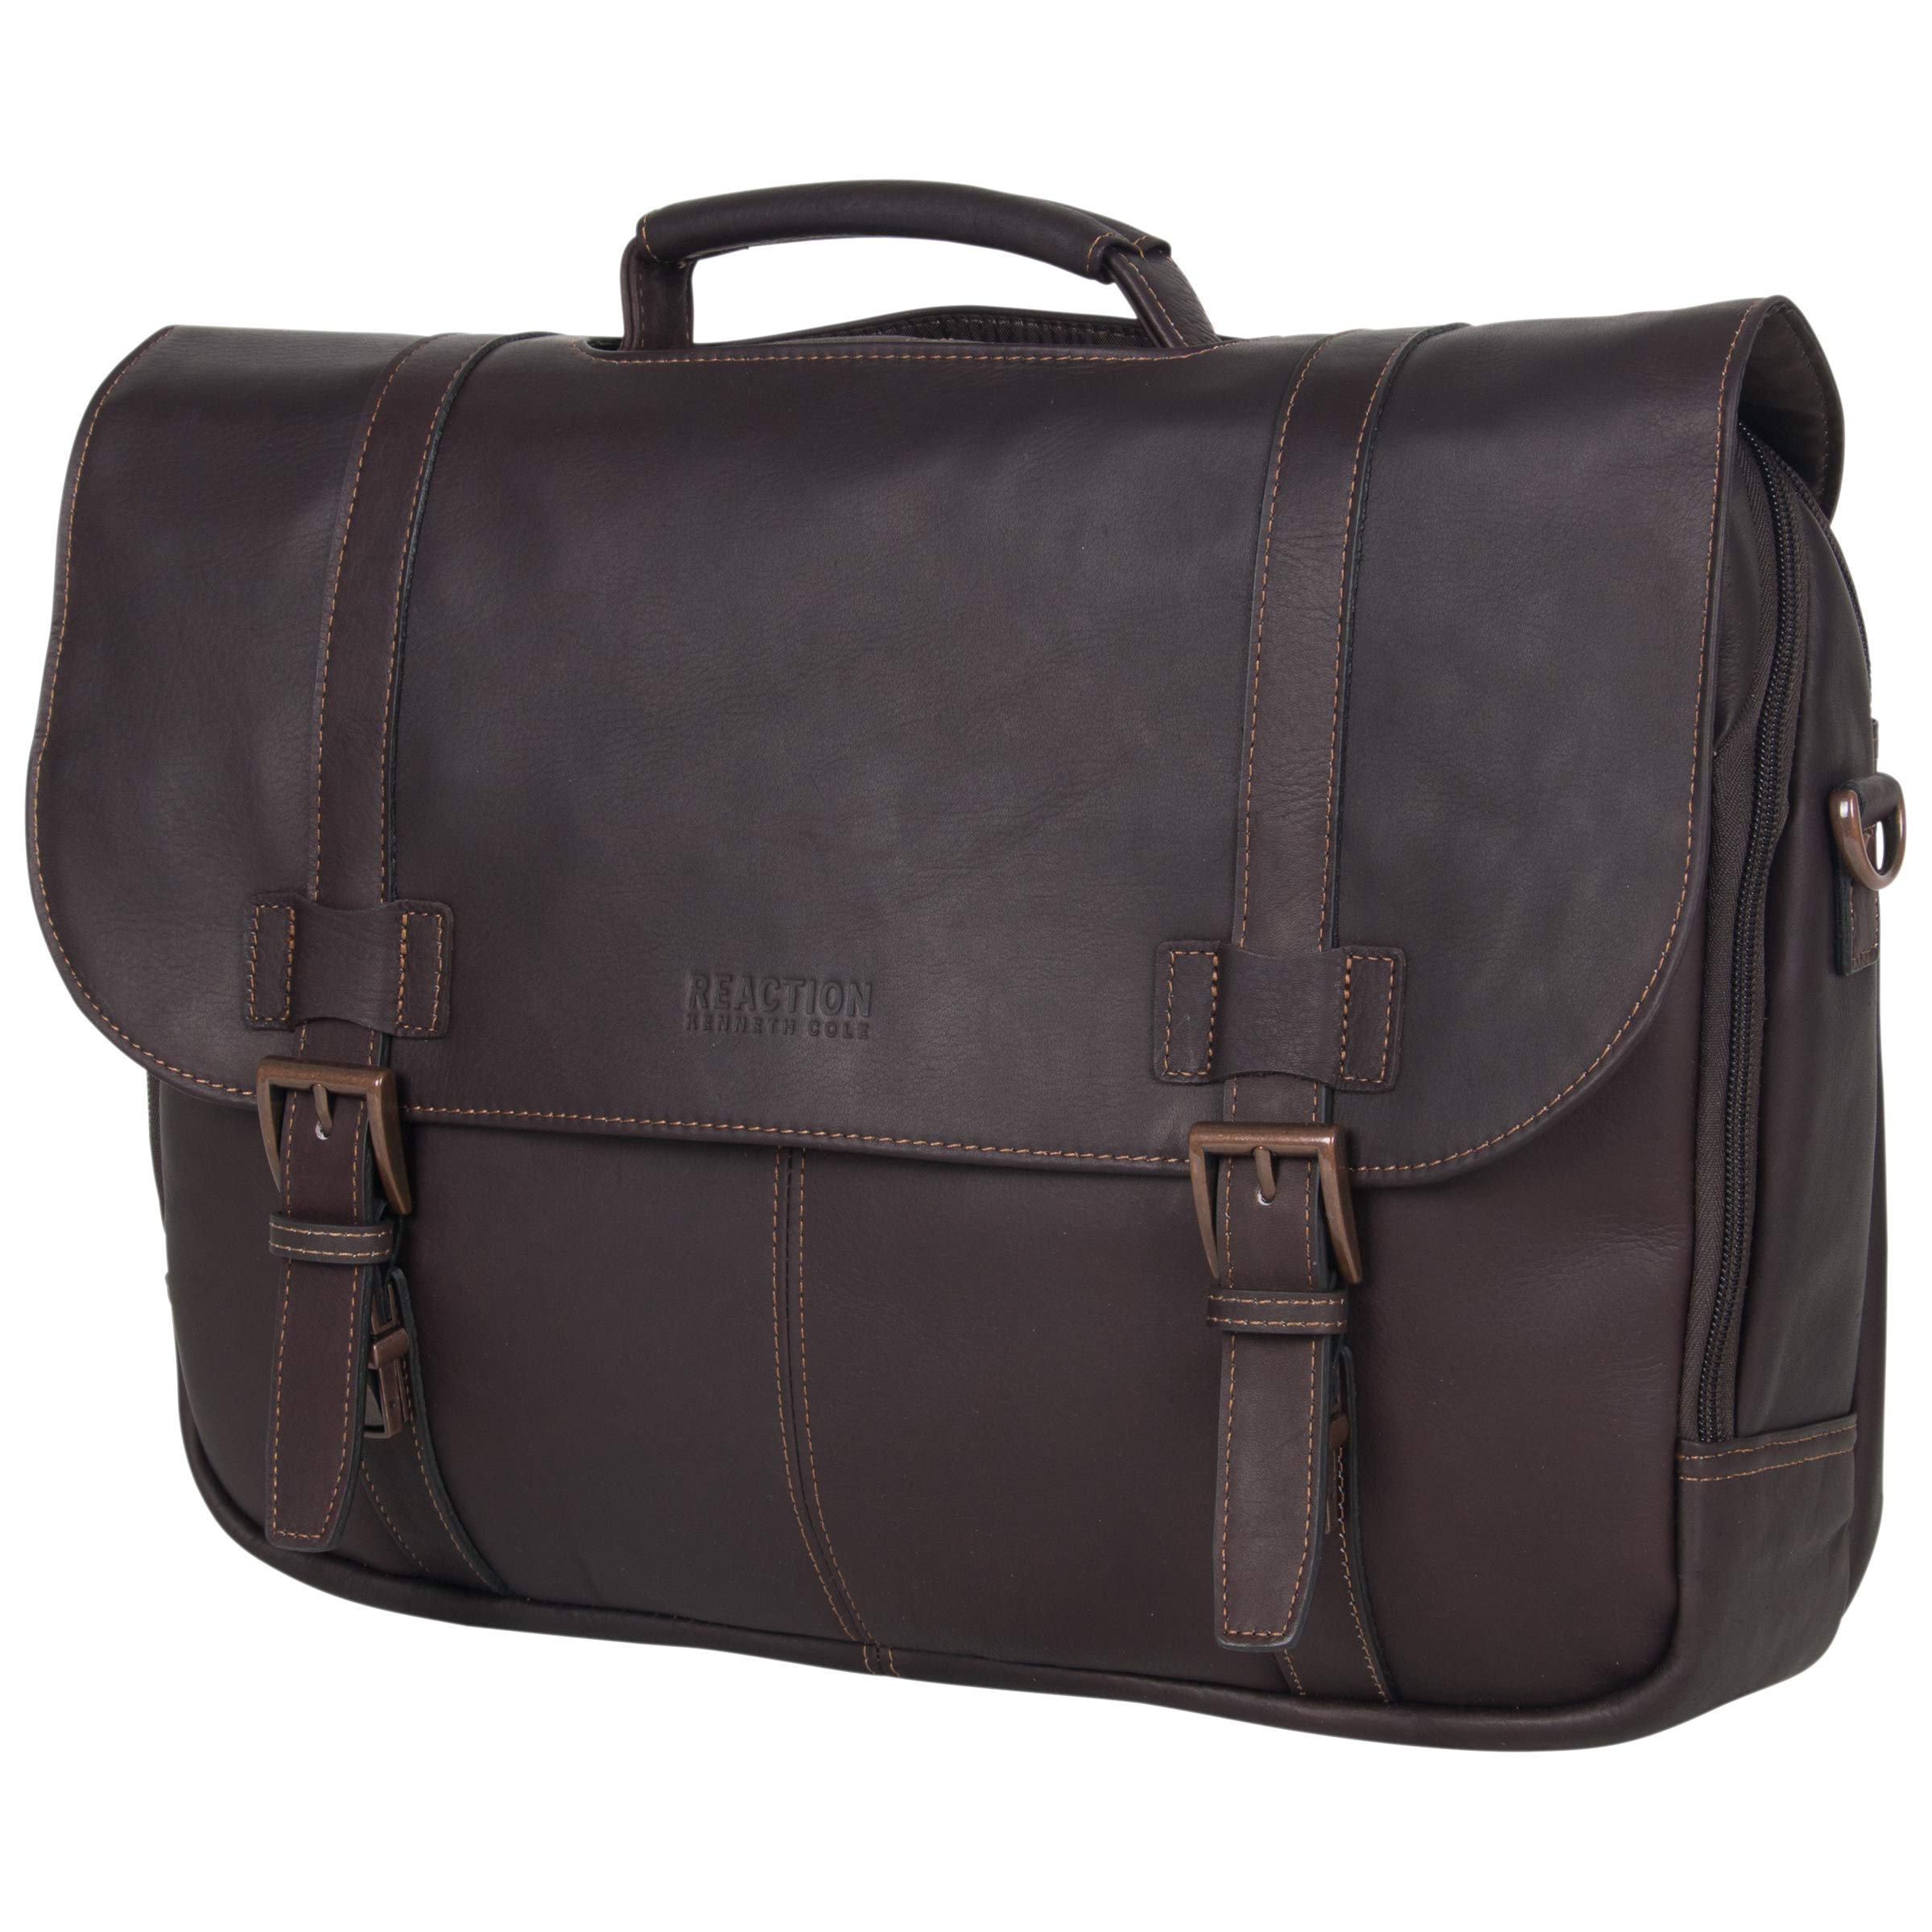 KENNETH COLE REACTION Show Business Messenger Briefcase Colombian Leather 16” Laptop Computer Portfolio Satchel Work Bag, Includes Card Holders, Dark Brown, One Size